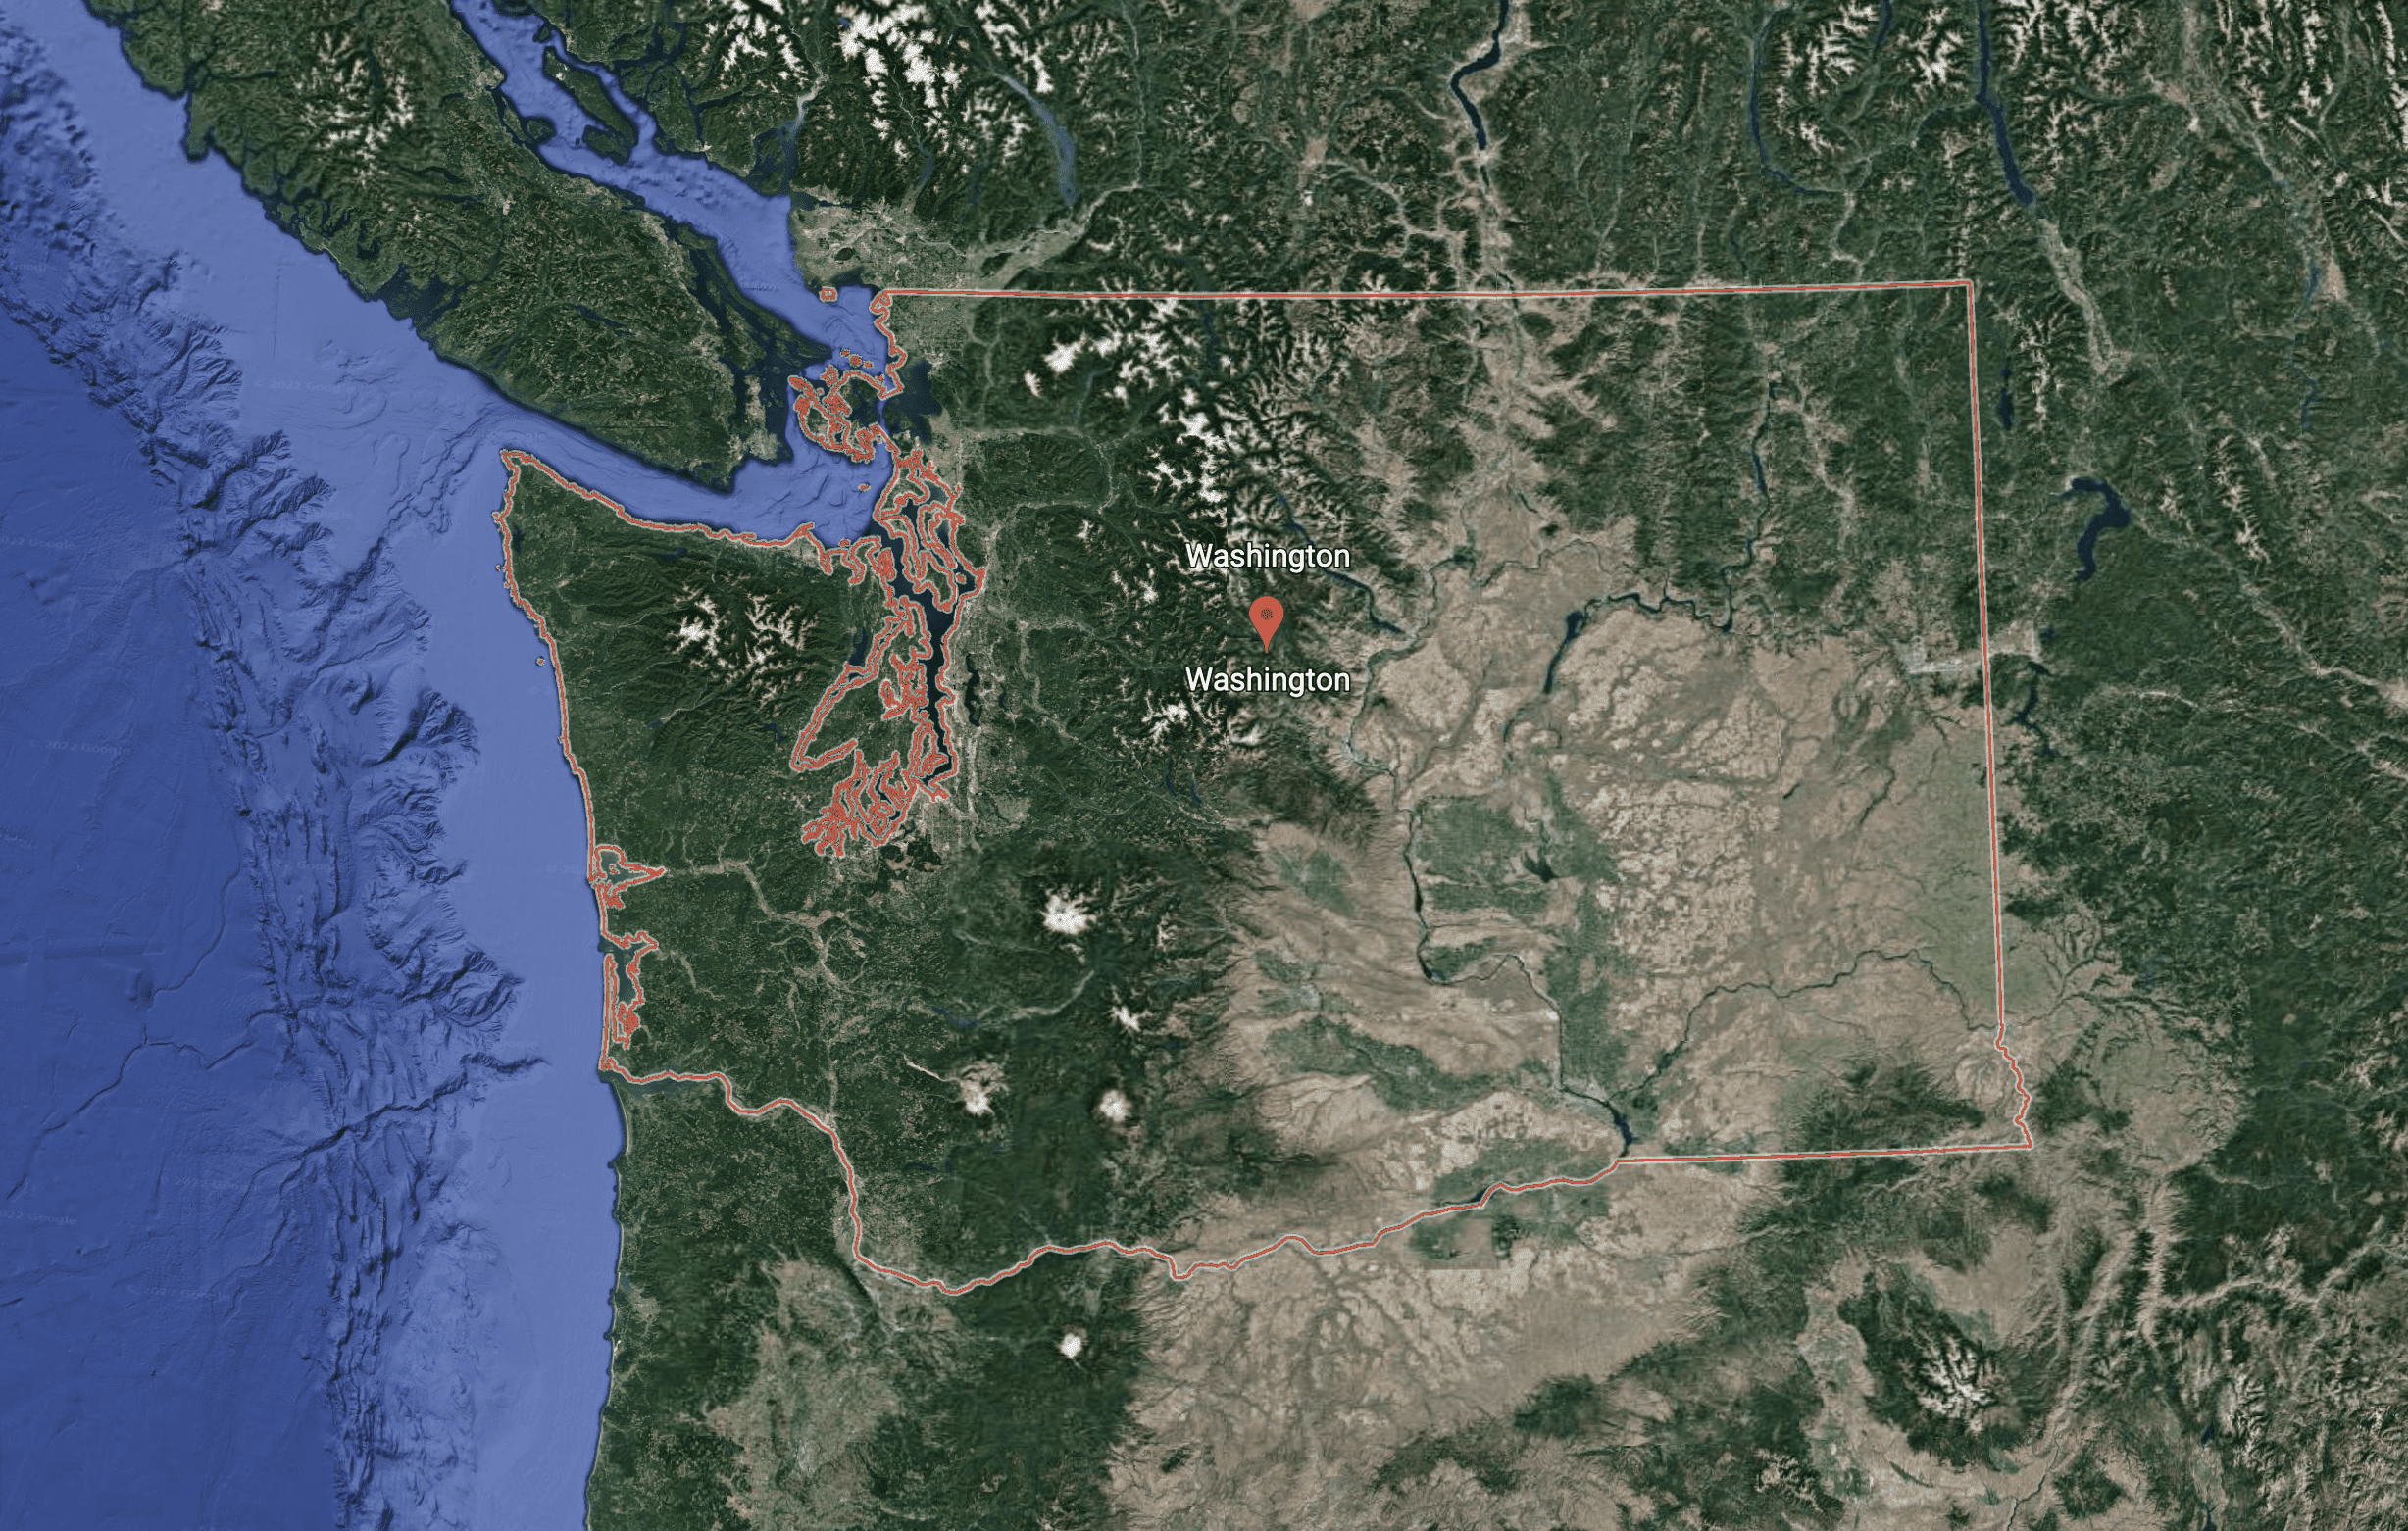 Satellite overhead image of Washington State from Google Earth 2022